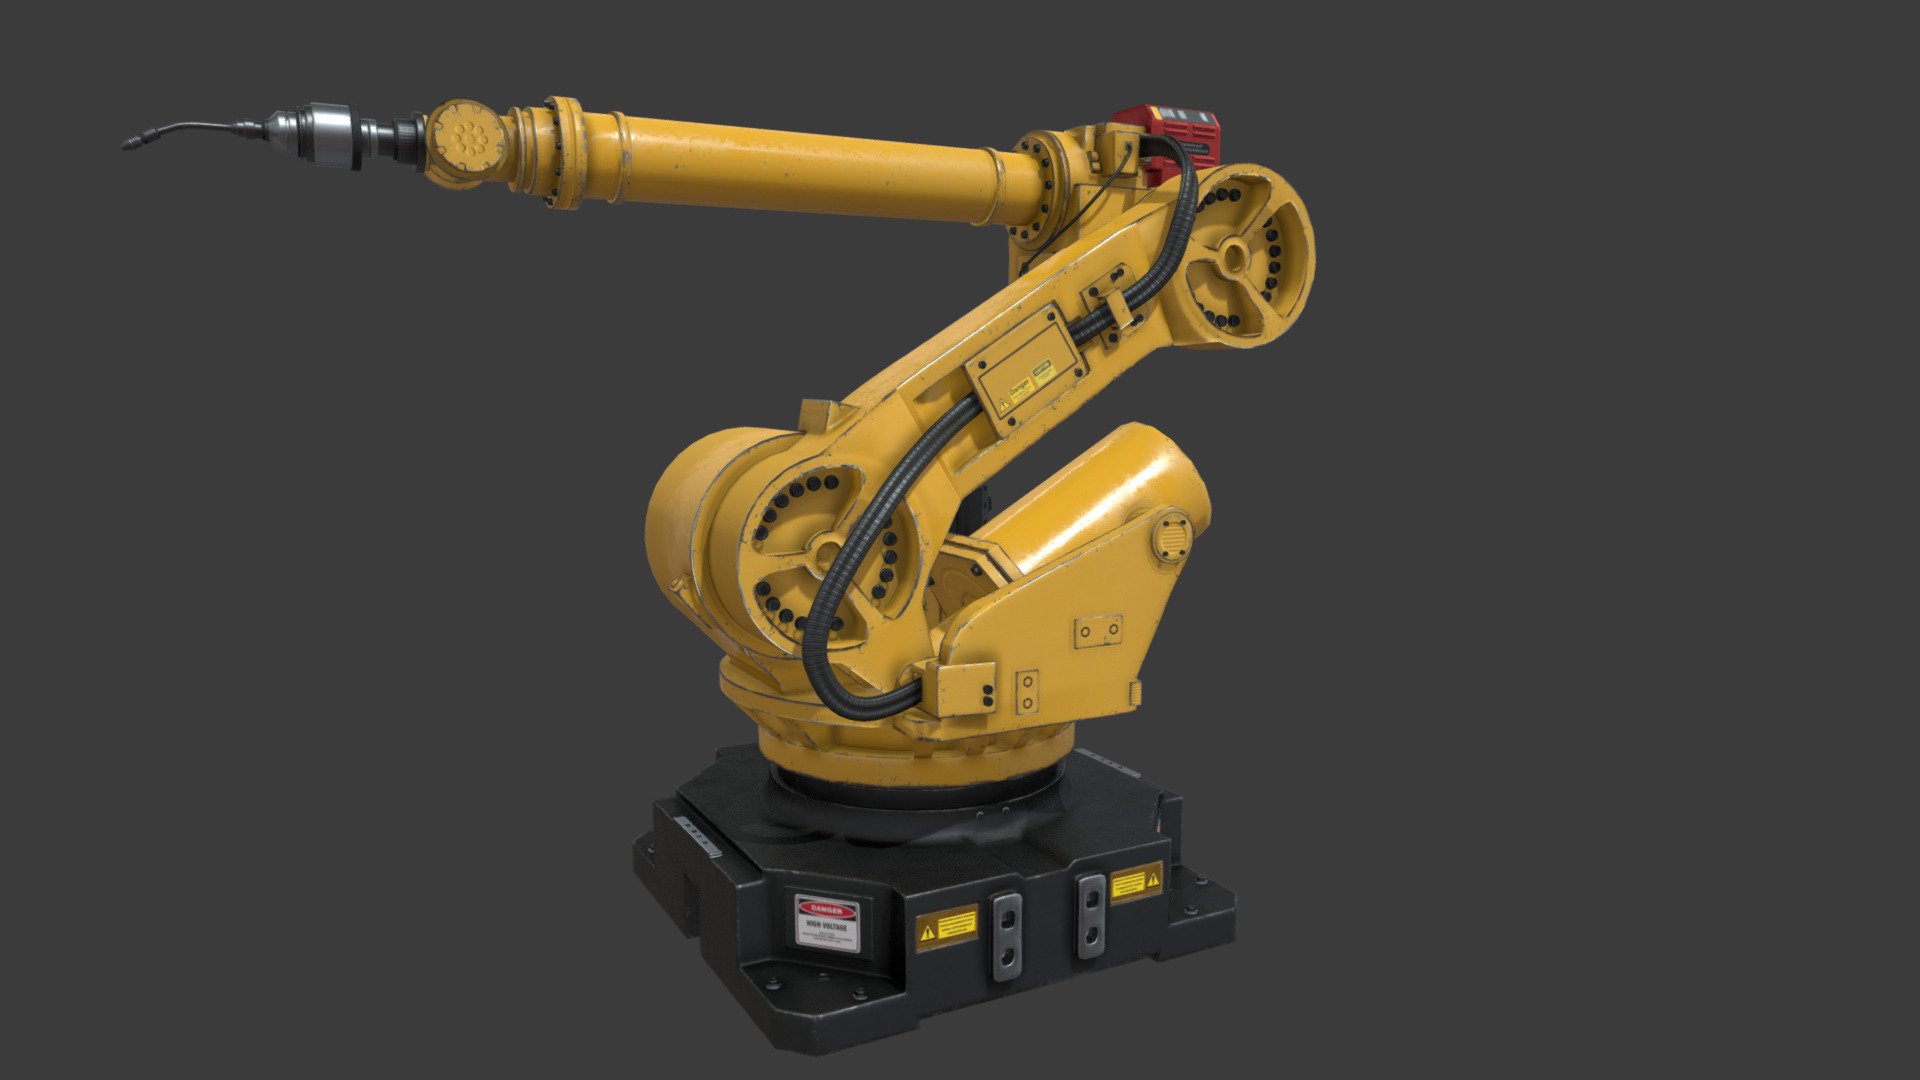 3D model of Industrial Robotic Arm.
Topology for games.
Not rigged.

PBR Textures:
1x 4k Main arm texture, 
3x 1k engine, base and tool texture - Industrial Robot - Download Free 3D model by jacuo777 3d model